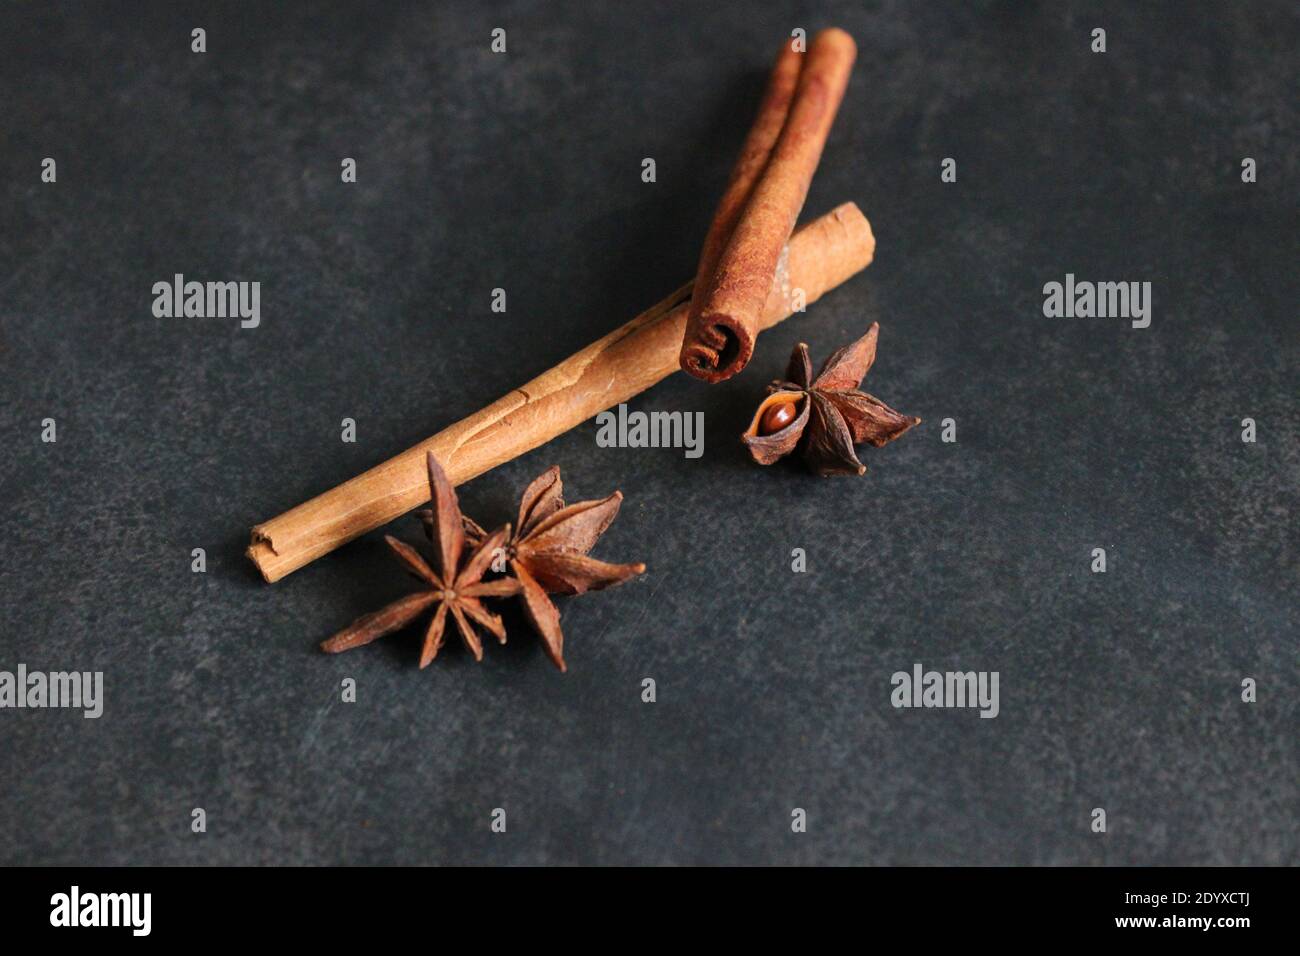 Spices on a dark background. Cinnamon sticks and anise stars. Stock Photo